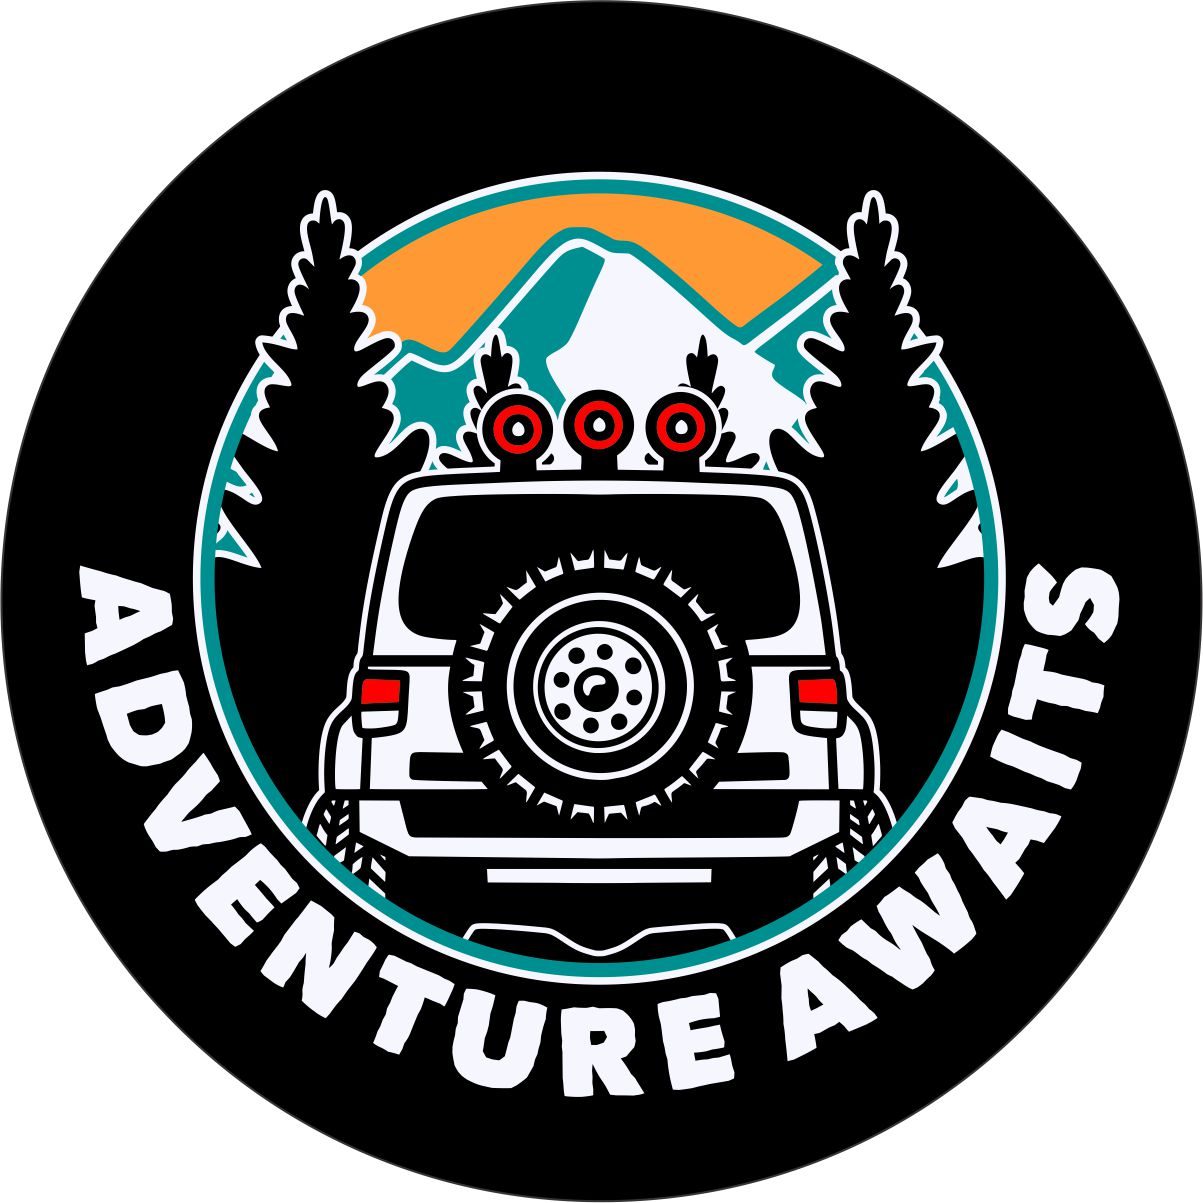 Spare tire cover design of the back side silhouette of a Jeep Wrangler driving into the mountains with the words adventure awaits below.